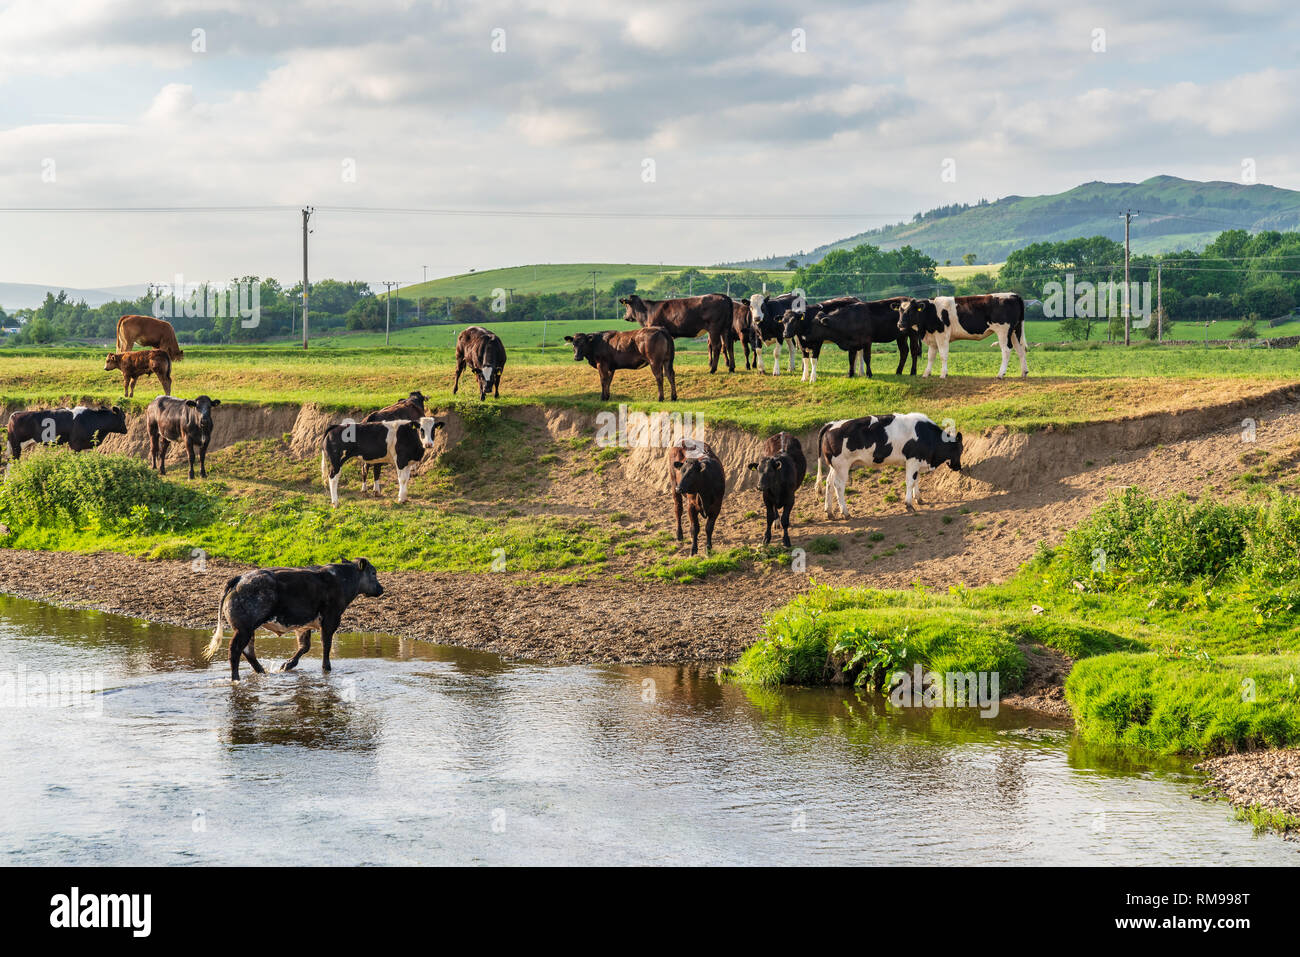 Near Skipton, North Yorkshire, England, UK - June 06, 2018: Cows bathing in the River Aire Stock Photo